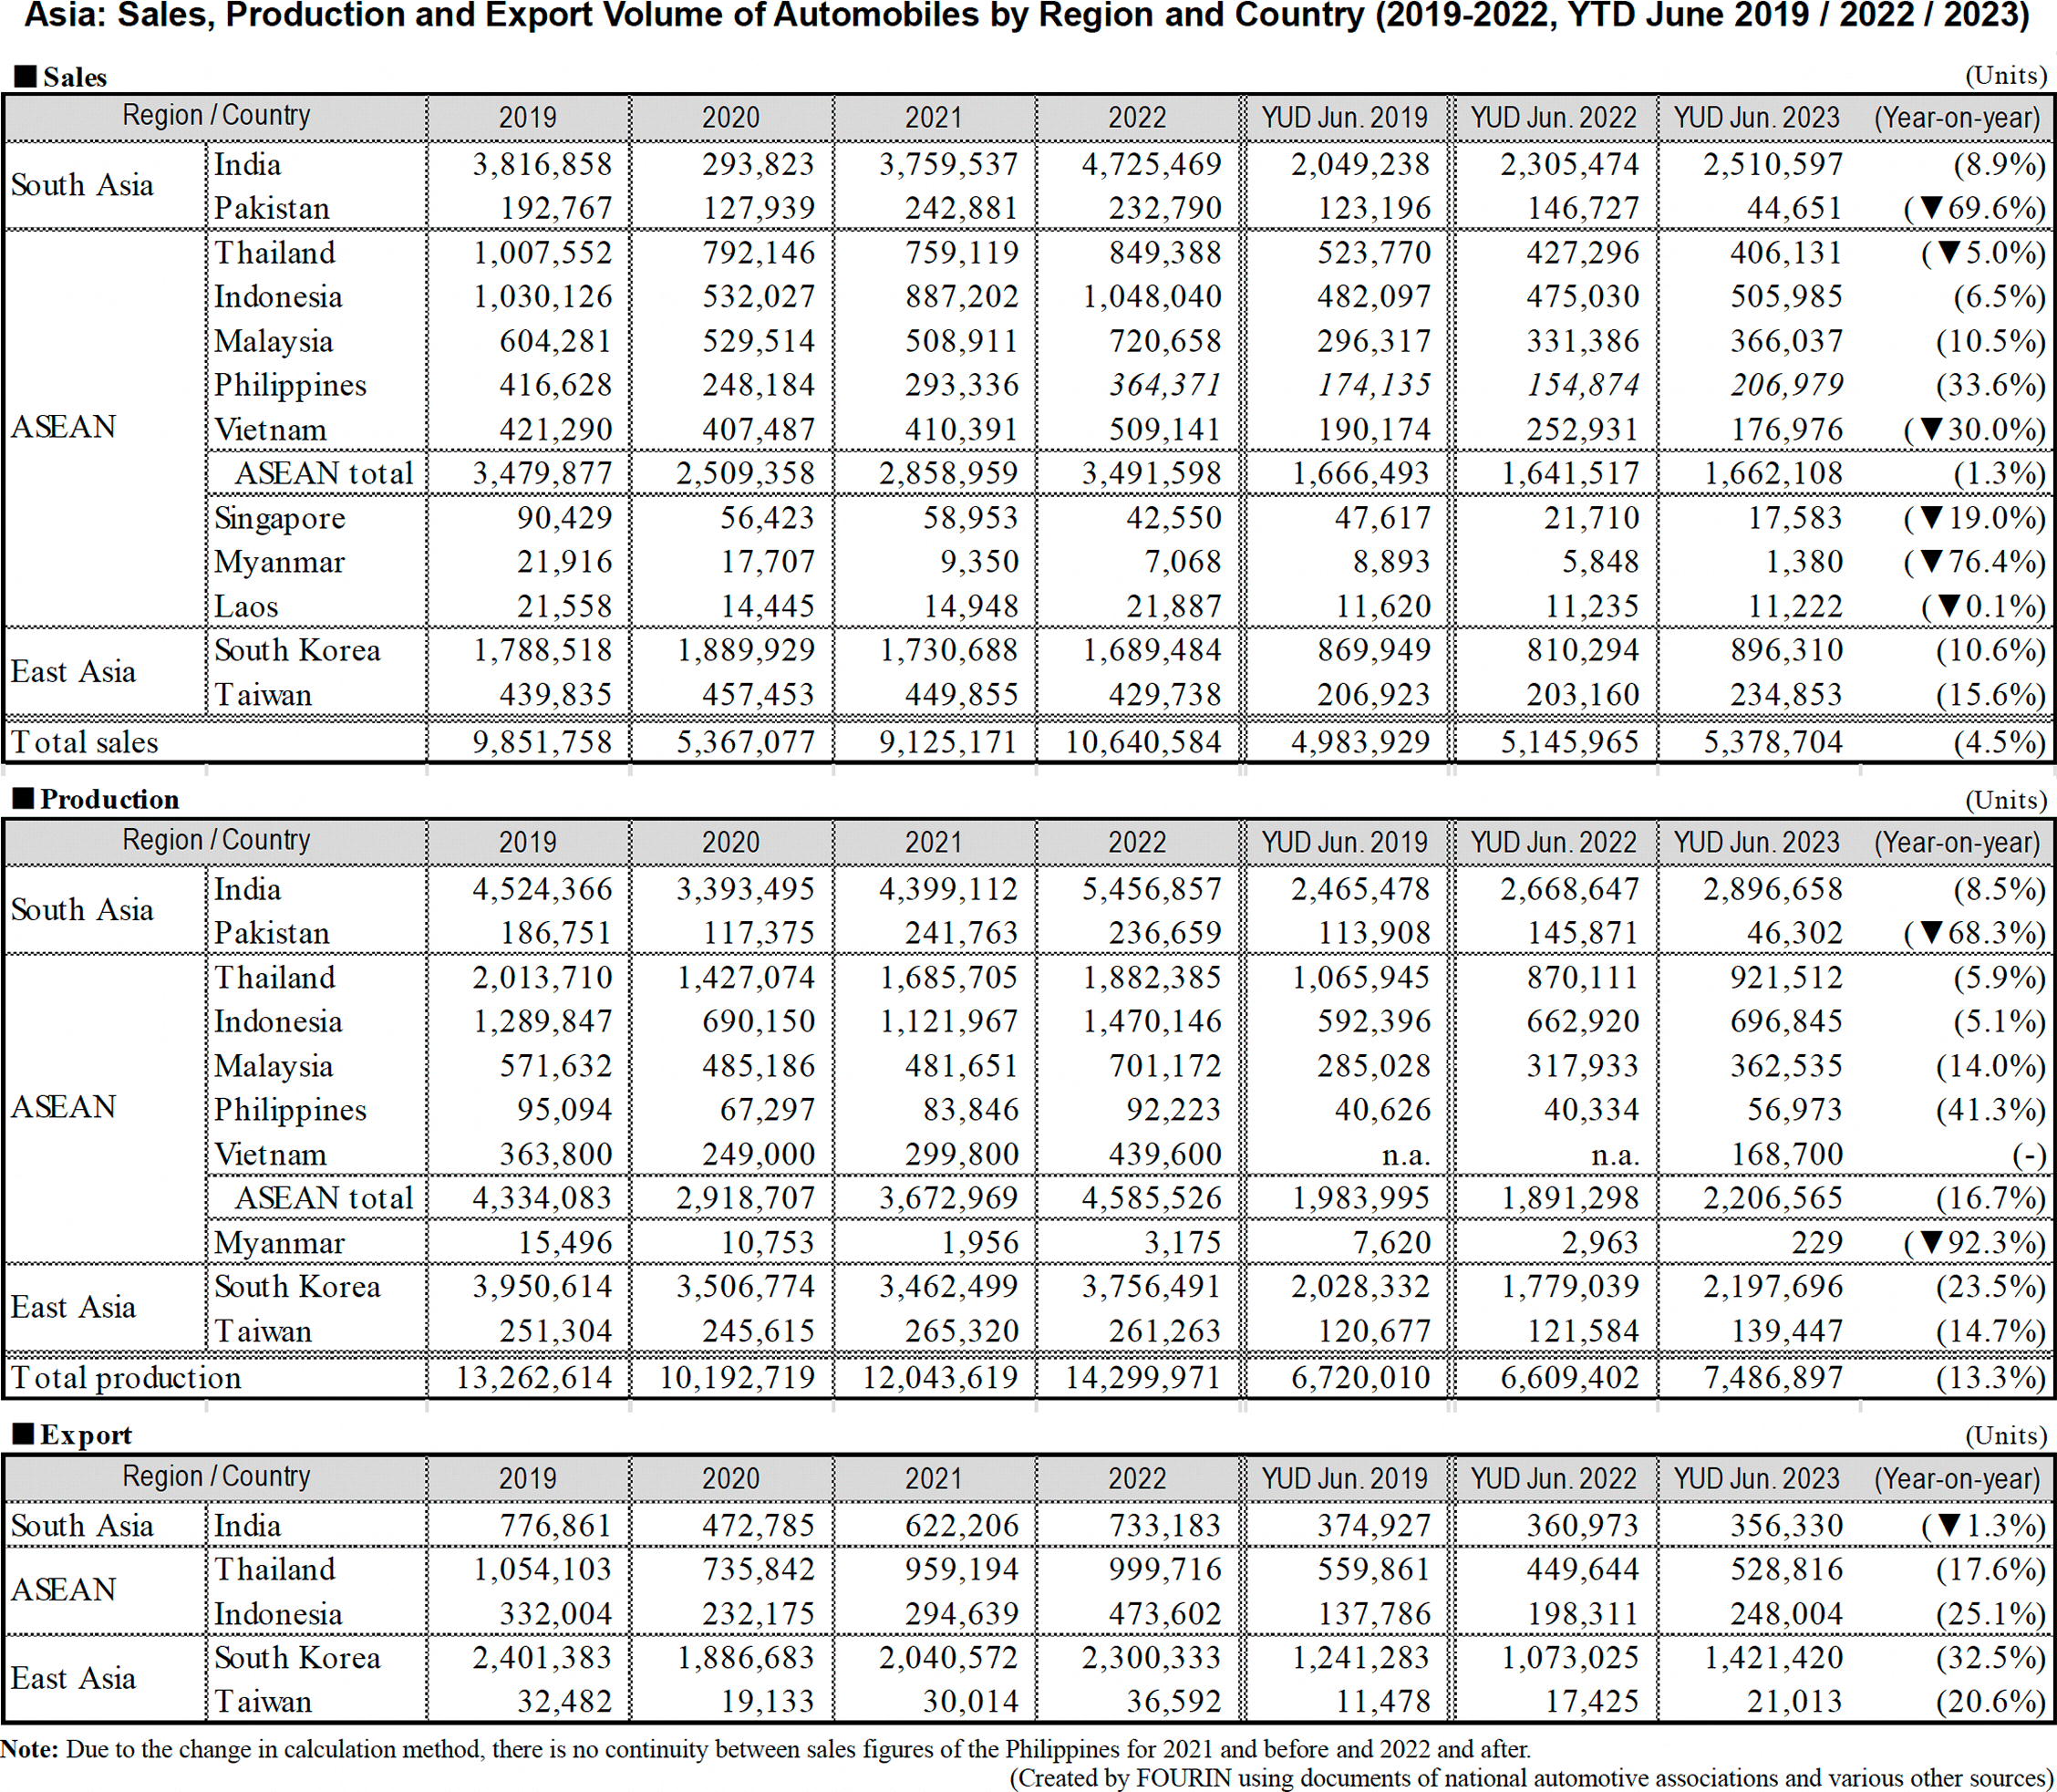 Table data: Asia: Sales Production and Export Volume of Automobiles by Region and Country (201 9 202 2 , YTD June 2019 2022 2023